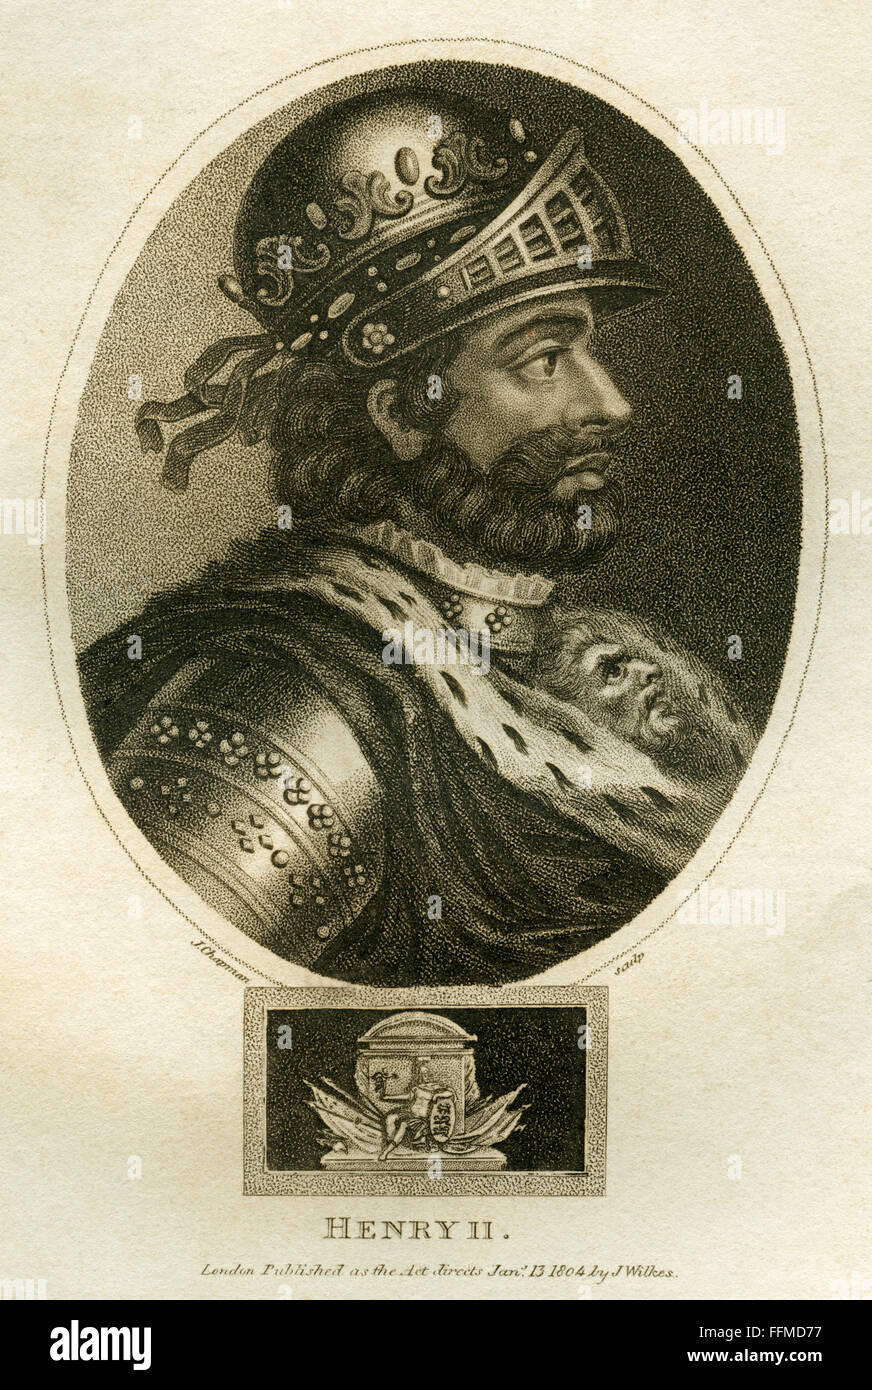 Henry II. of England, duke of the Normandy, born 1133 in Le Mans, died 1189 in Chinon , King of England between 1154 and 1189 , steel engraving by Chapman , about 1803., Editorial-Use-Only Stock Photo